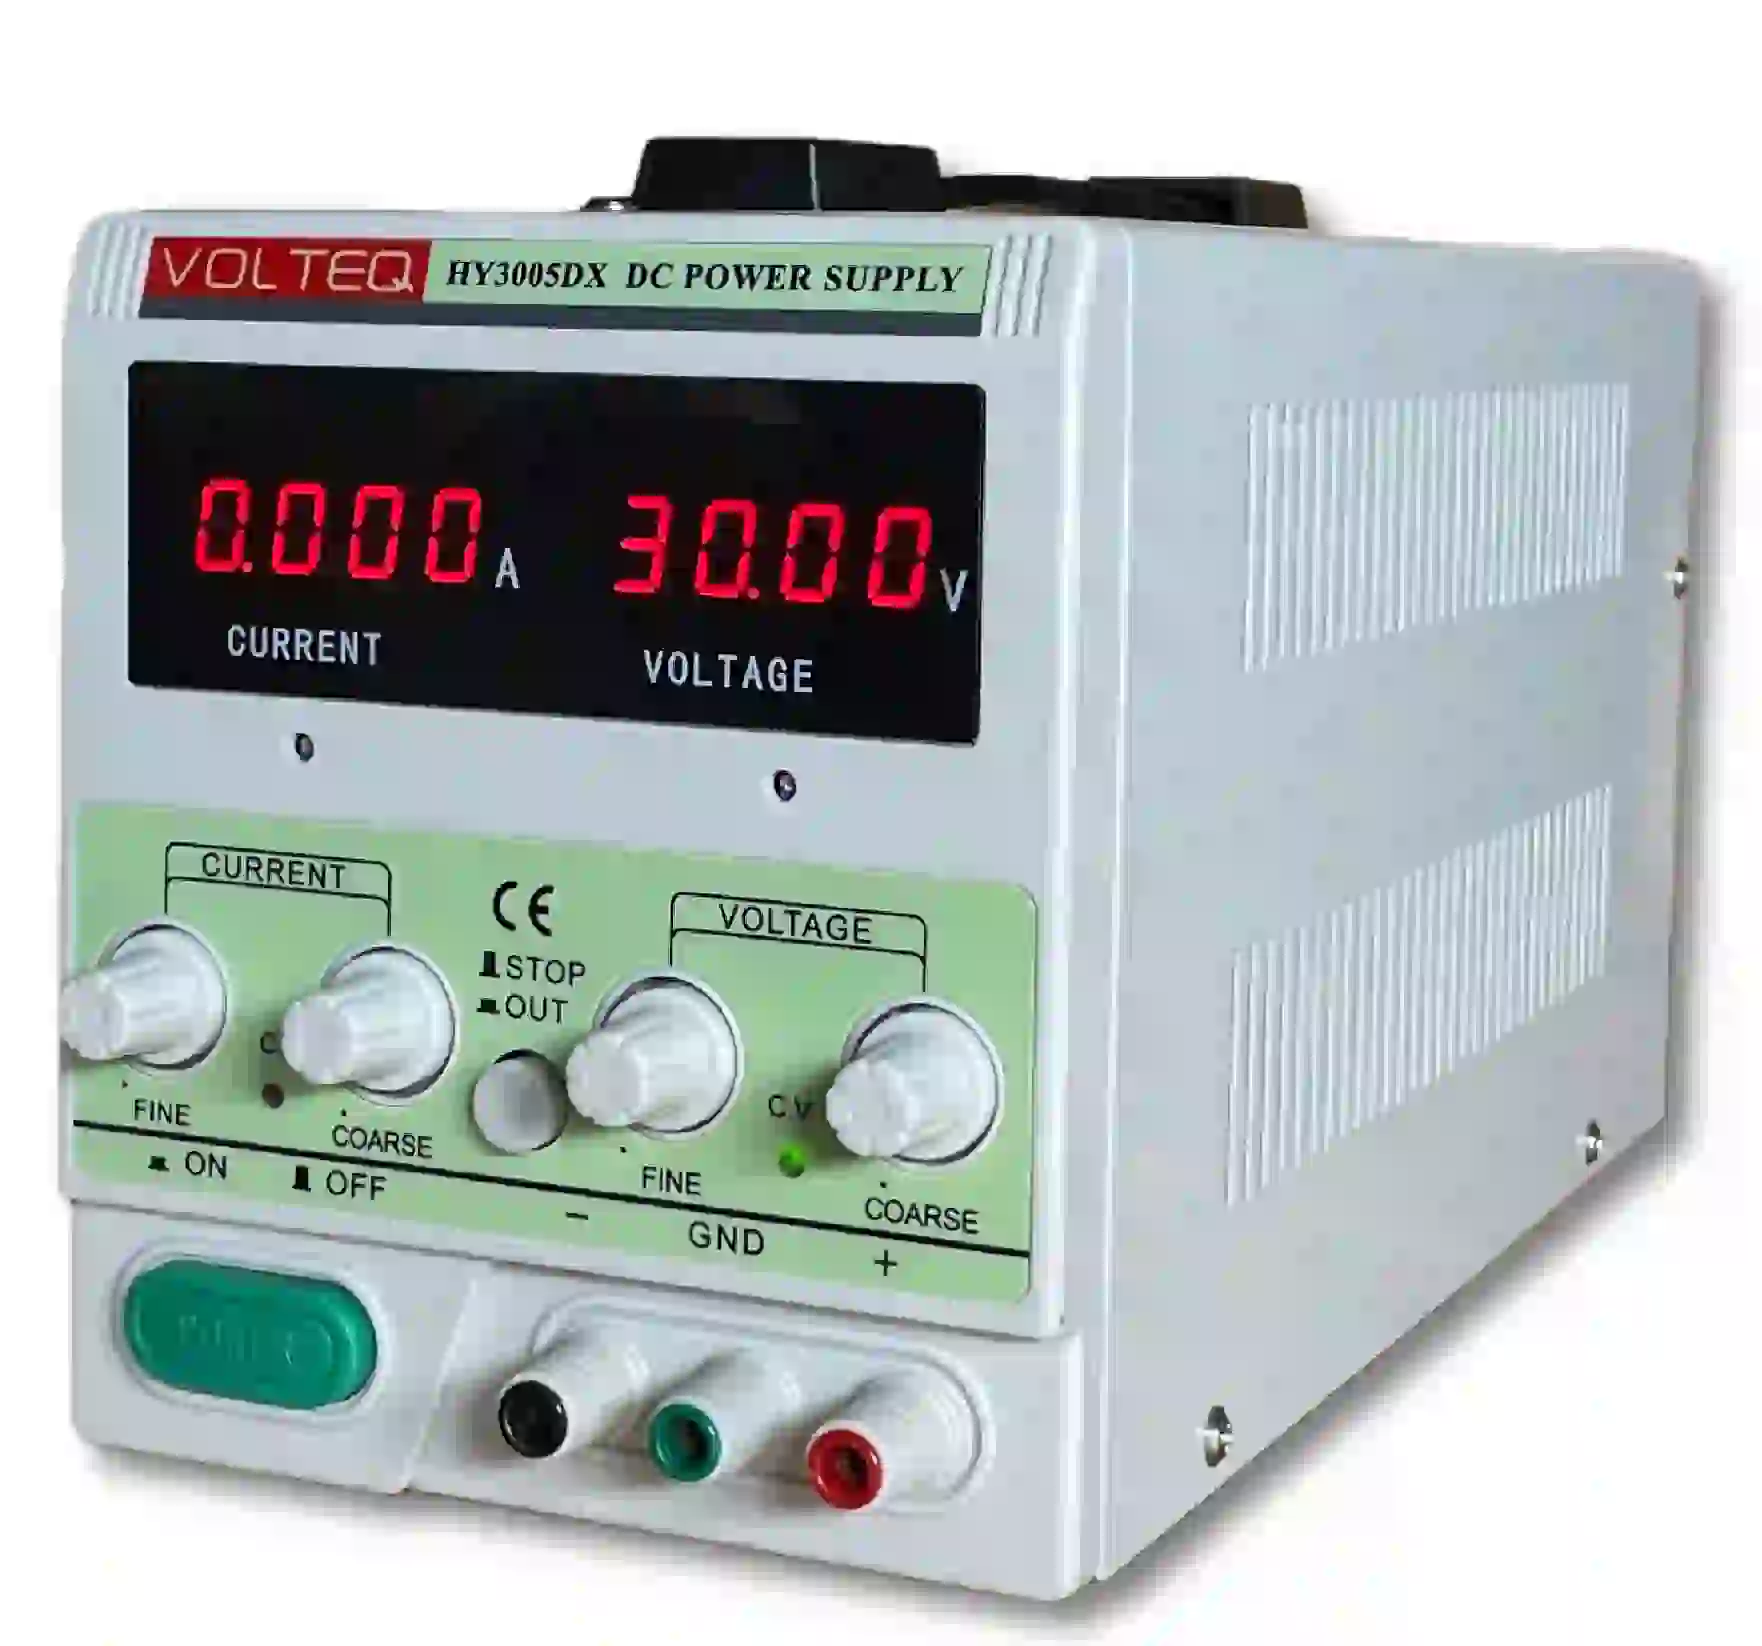  Linear Power Supply HY3005DX